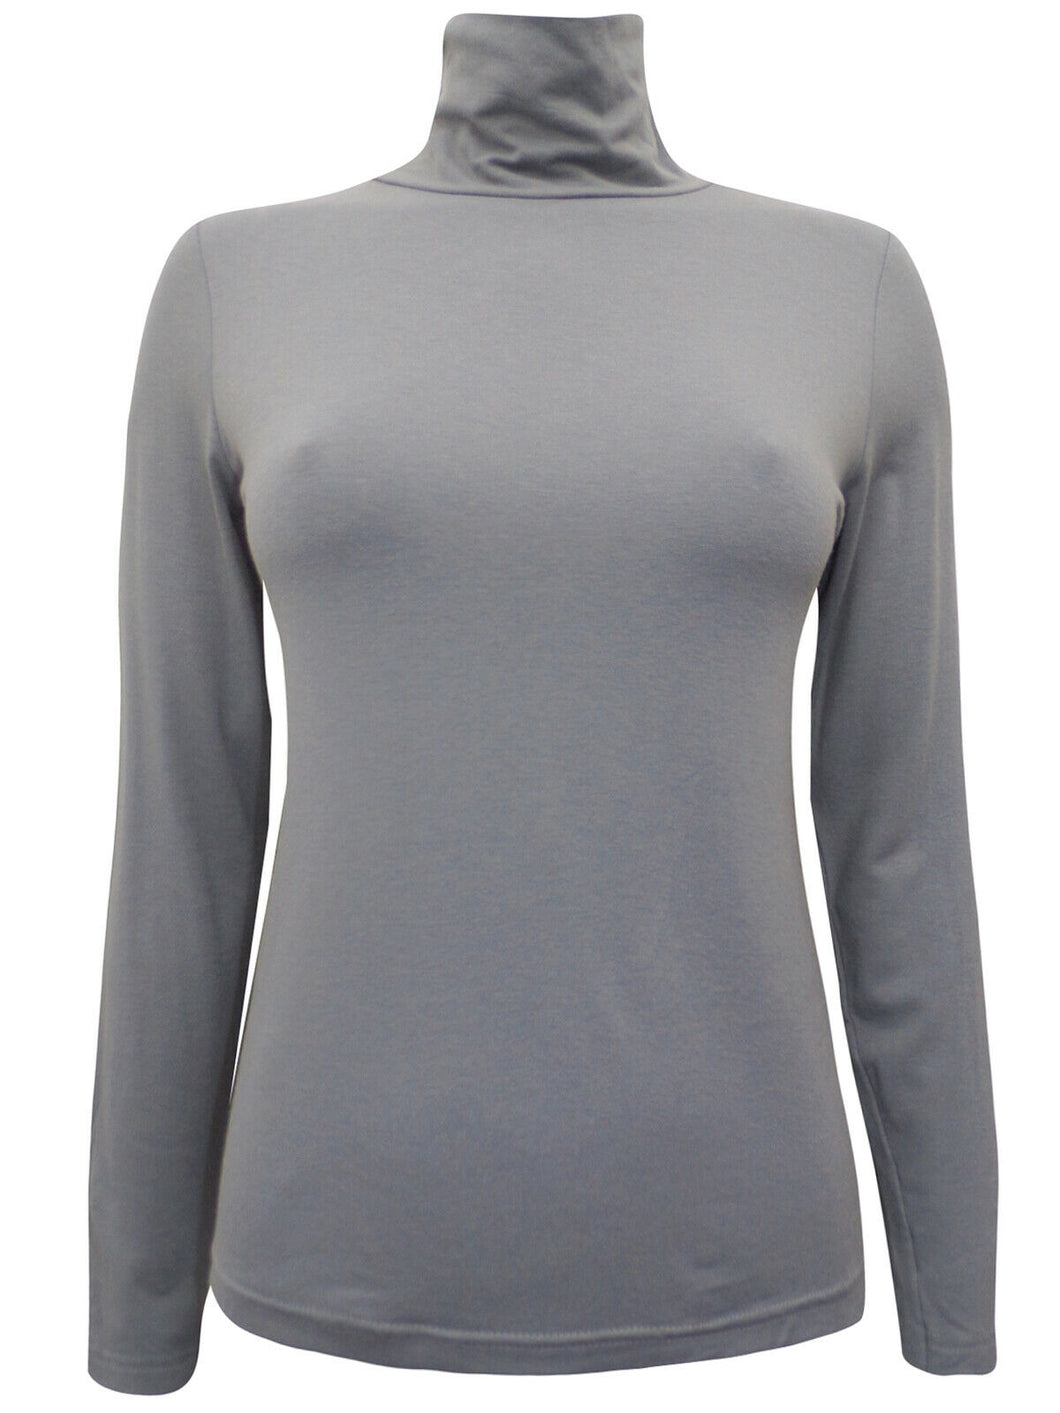 Grey Turtle Roll Neck Stretchy Jersey Top